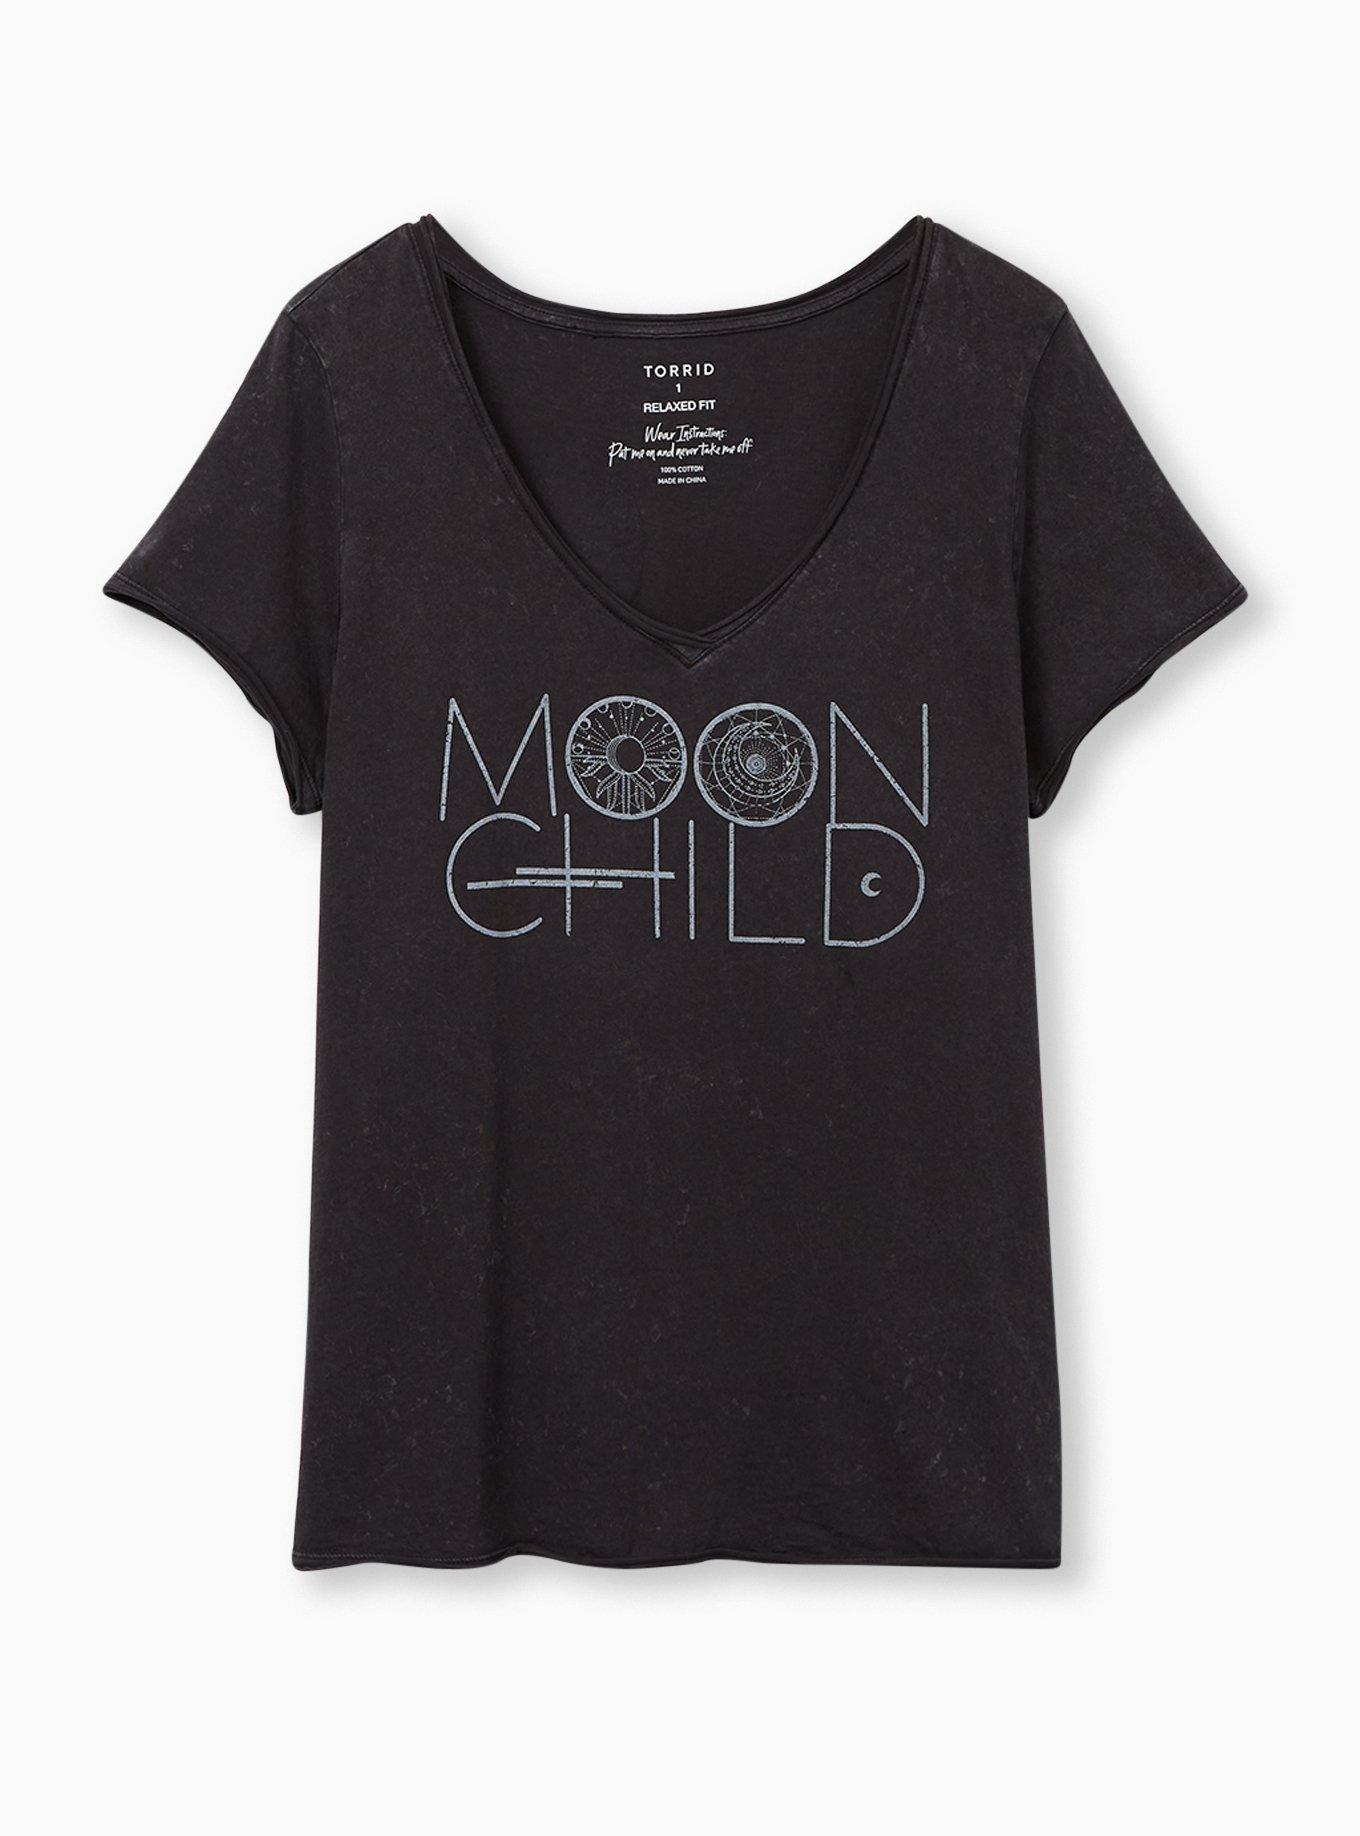 Plus Size - Moon Child Classic Fit V-Neck Tee - Black Mineral Wash - Torrid